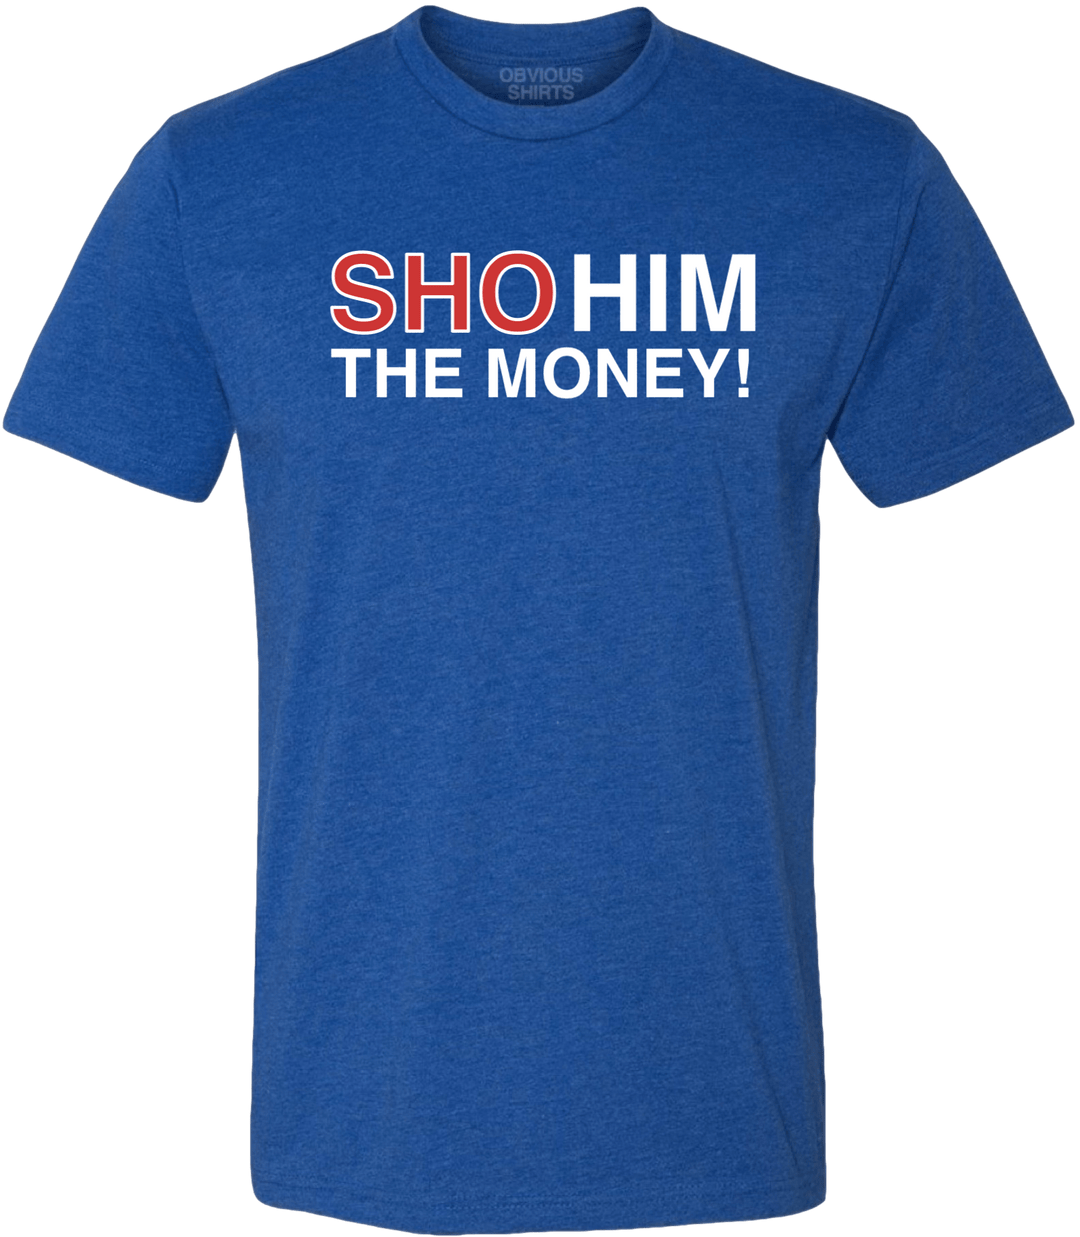 SHO HIM THE MONEY! - OBVIOUS SHIRTS